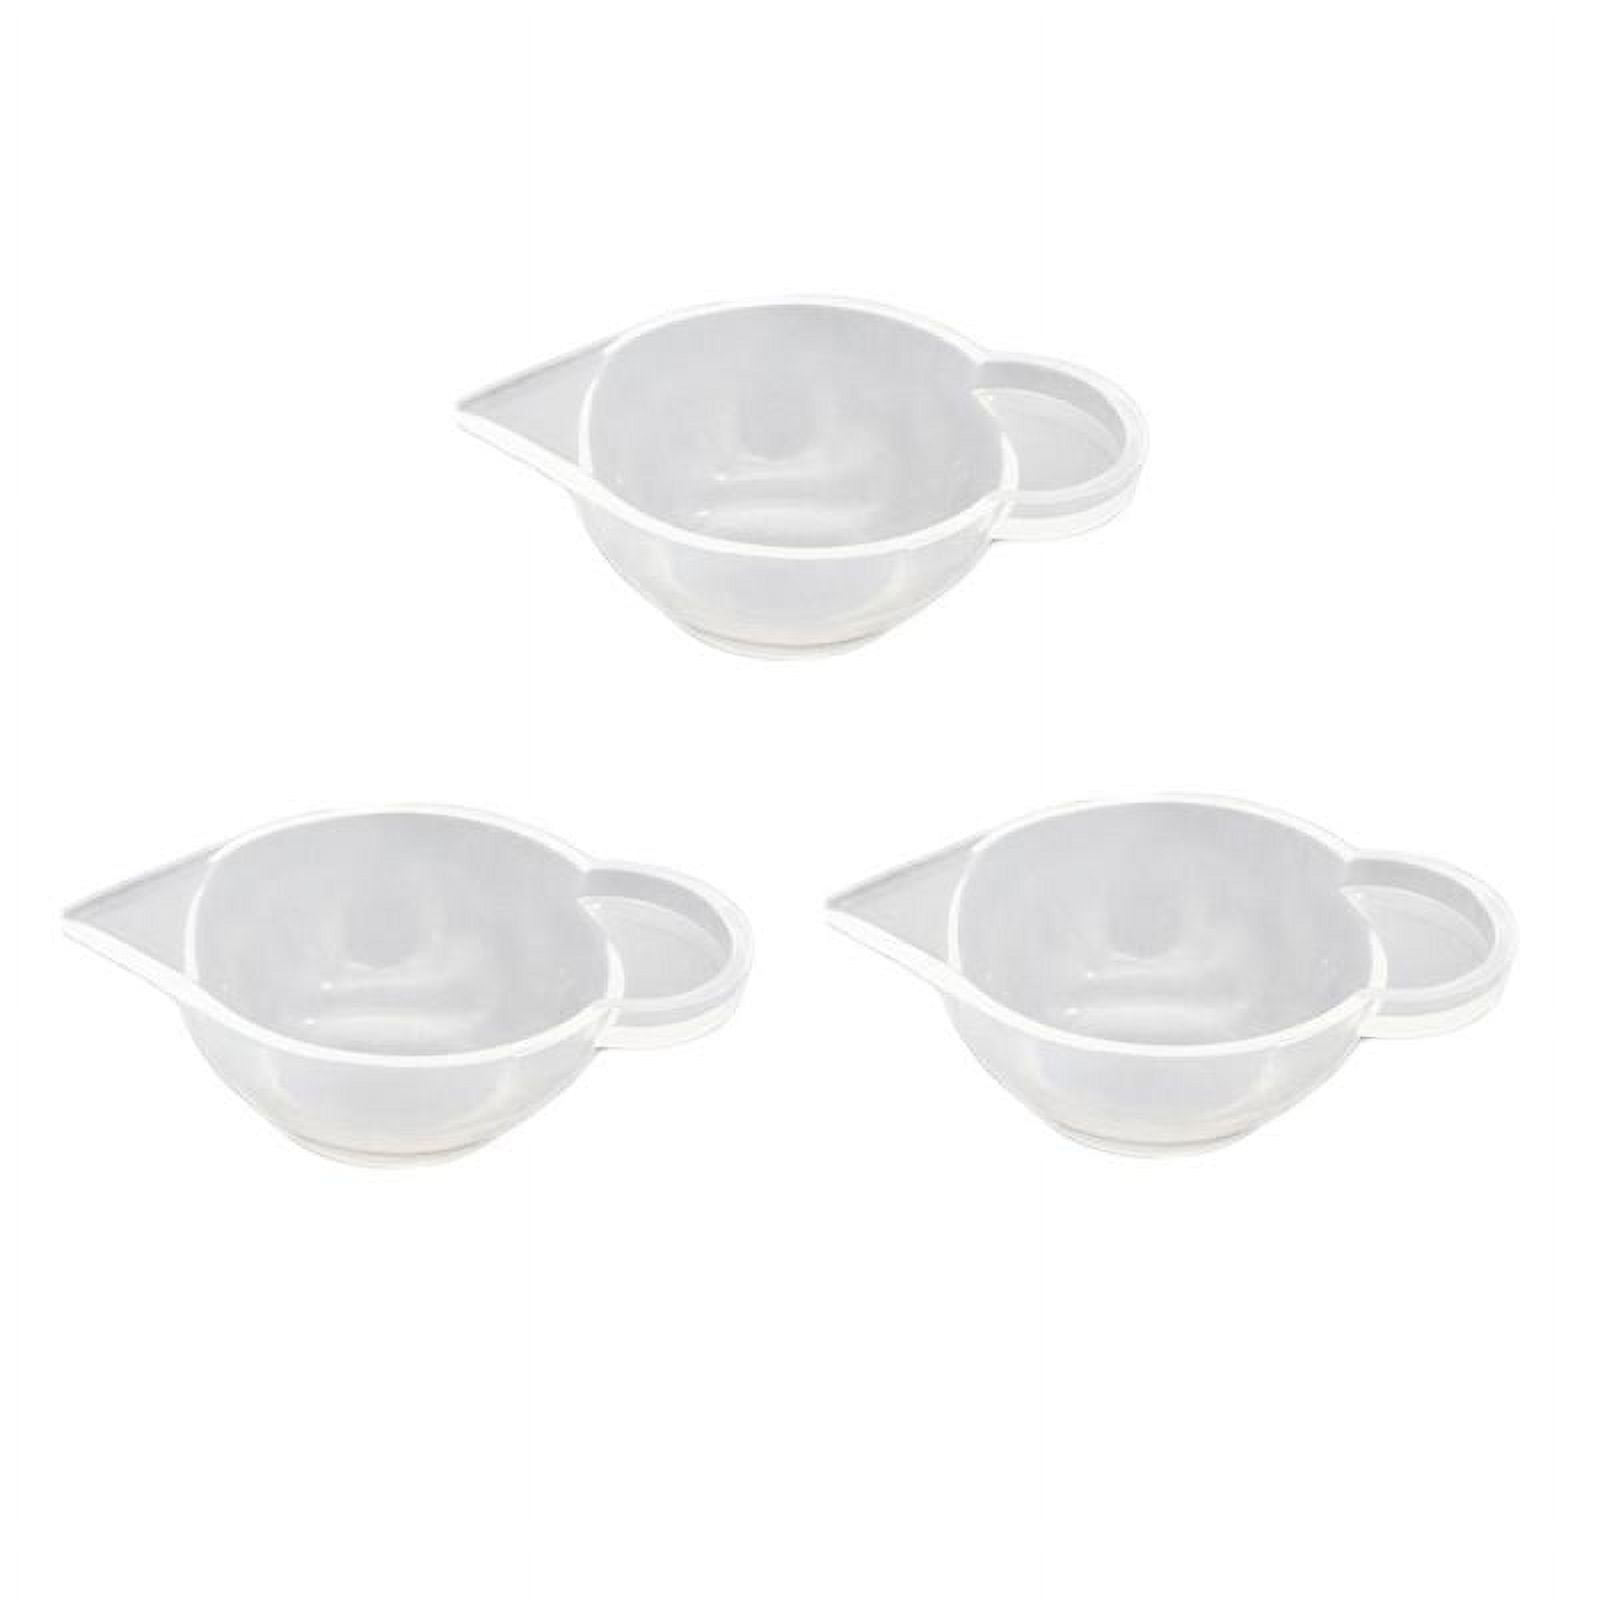 5pcs Epoxy Resin Mixing Cups Set DIY Tools Silicone Measuring Cups